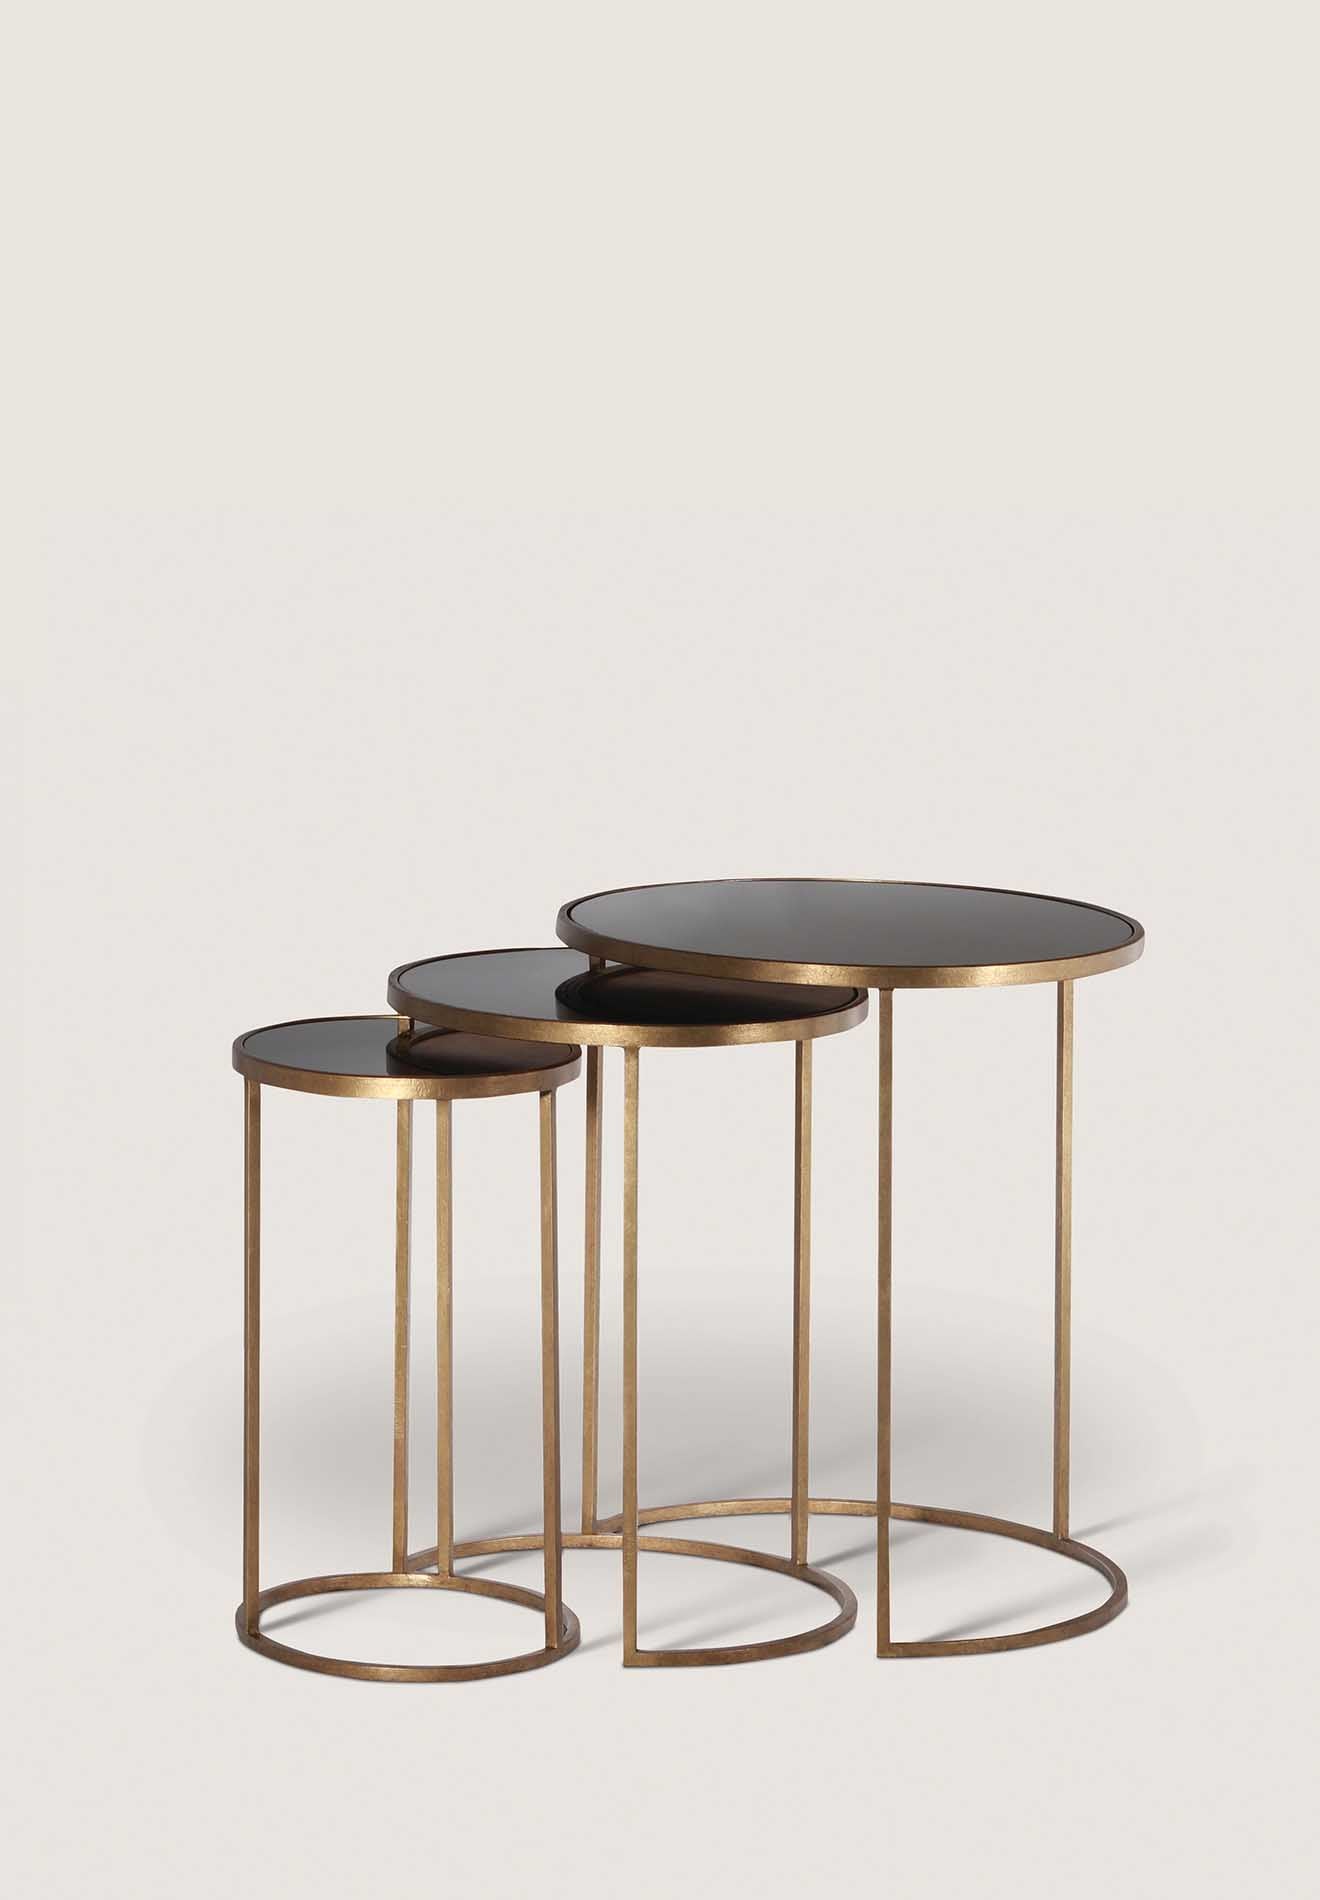 French Brass shown with Black Glass Tops